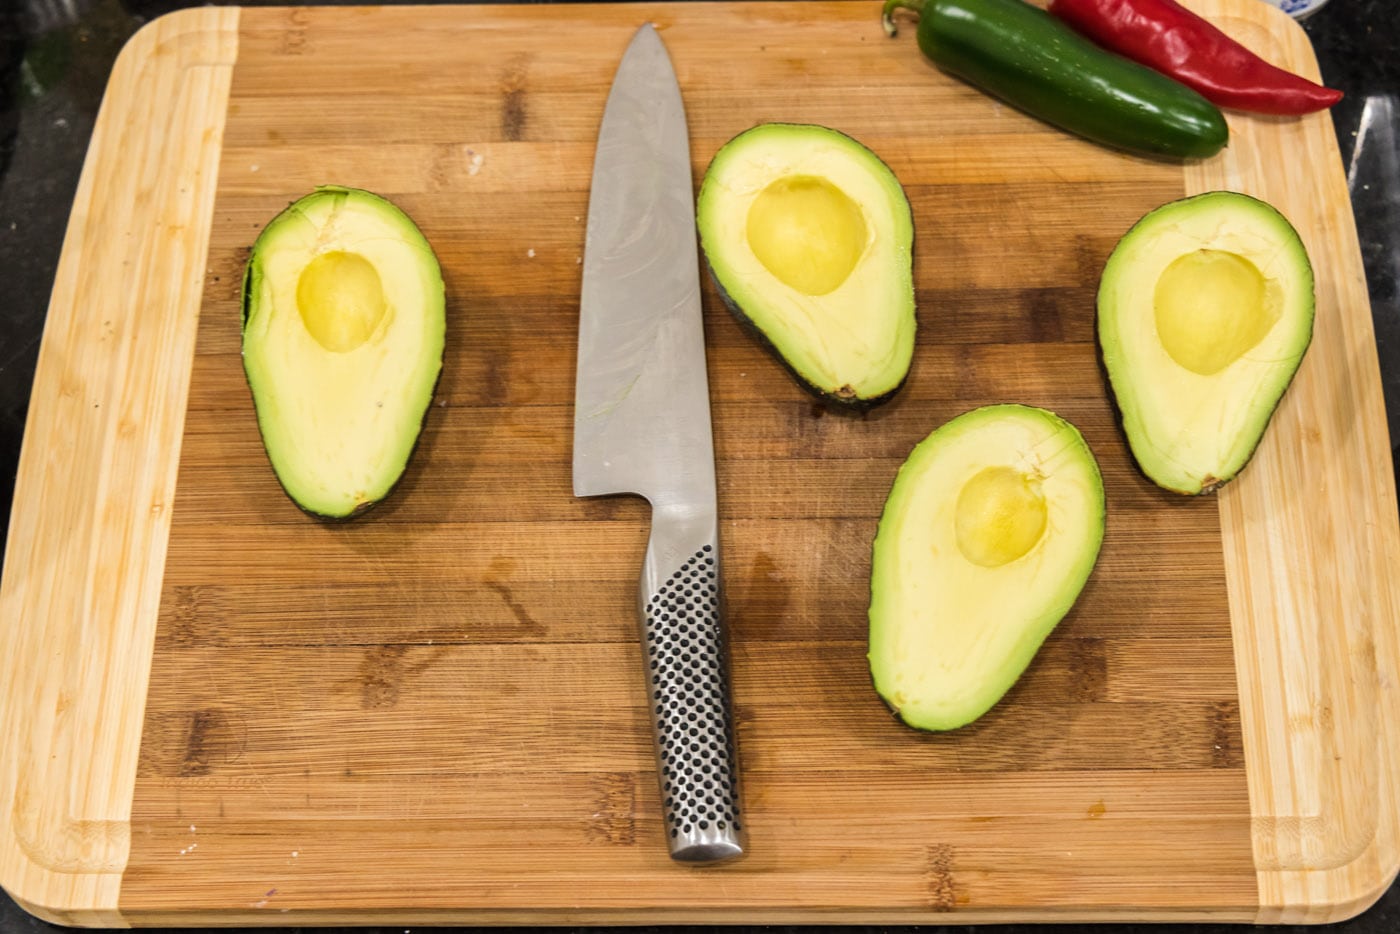 knife on a cutting board with sliced avocados